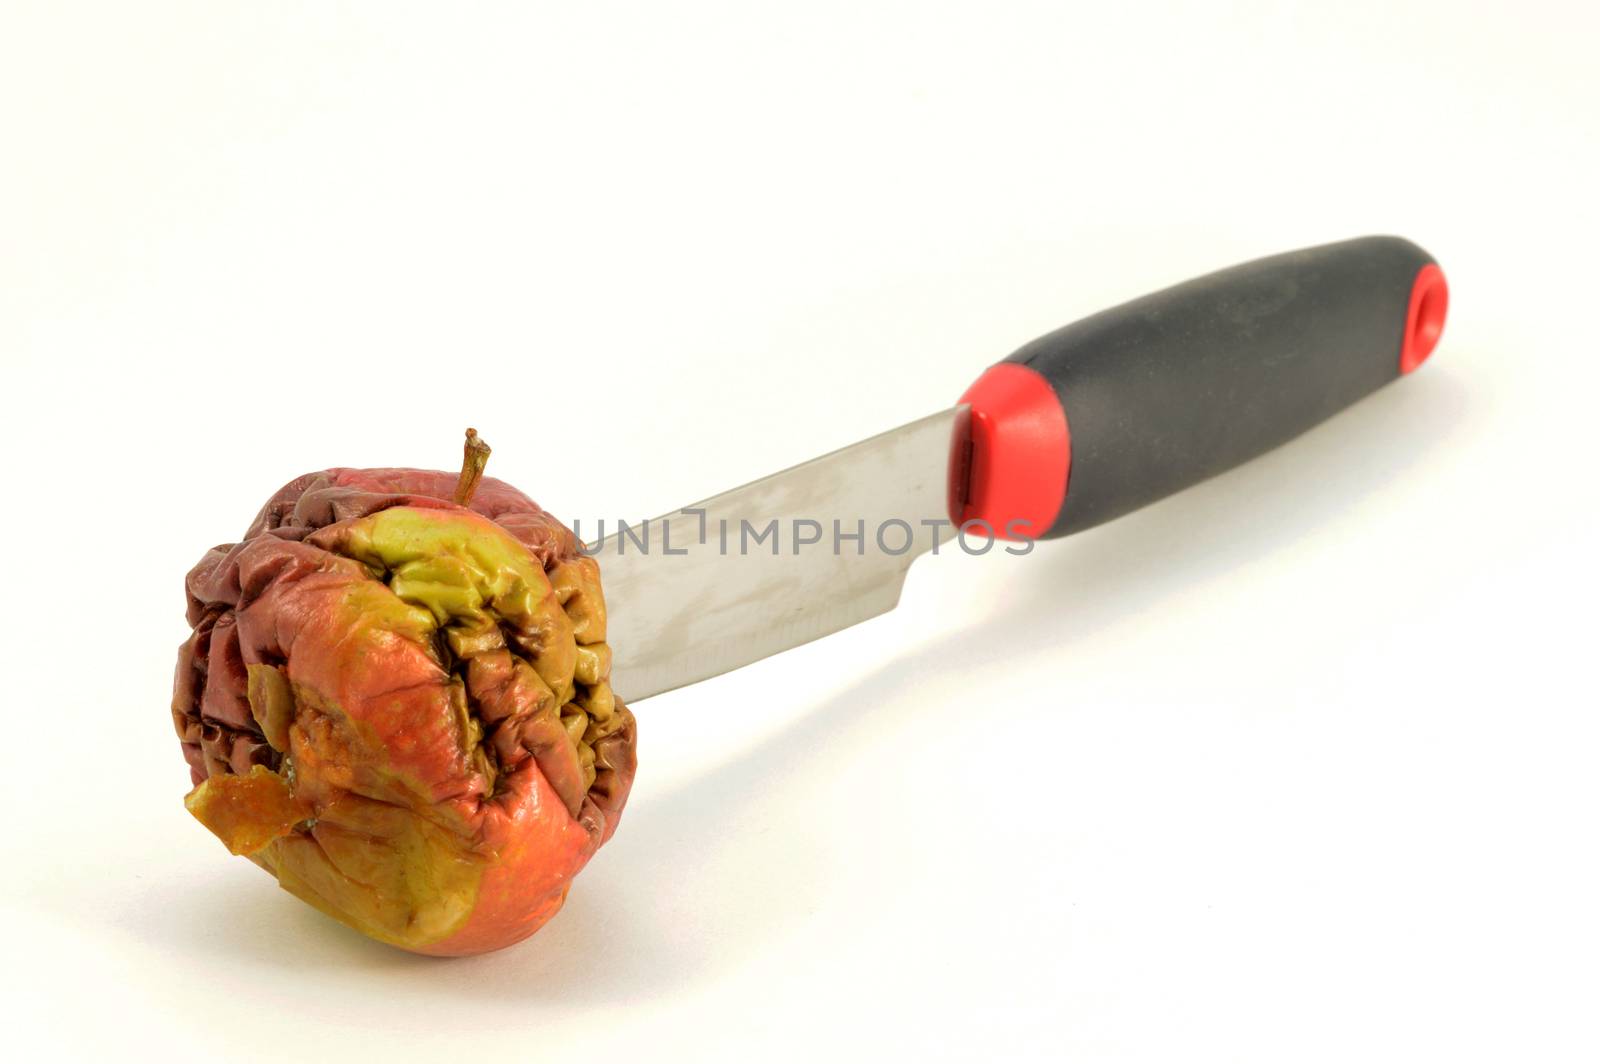 An isolated shot of one bad apple being cut with a knife.